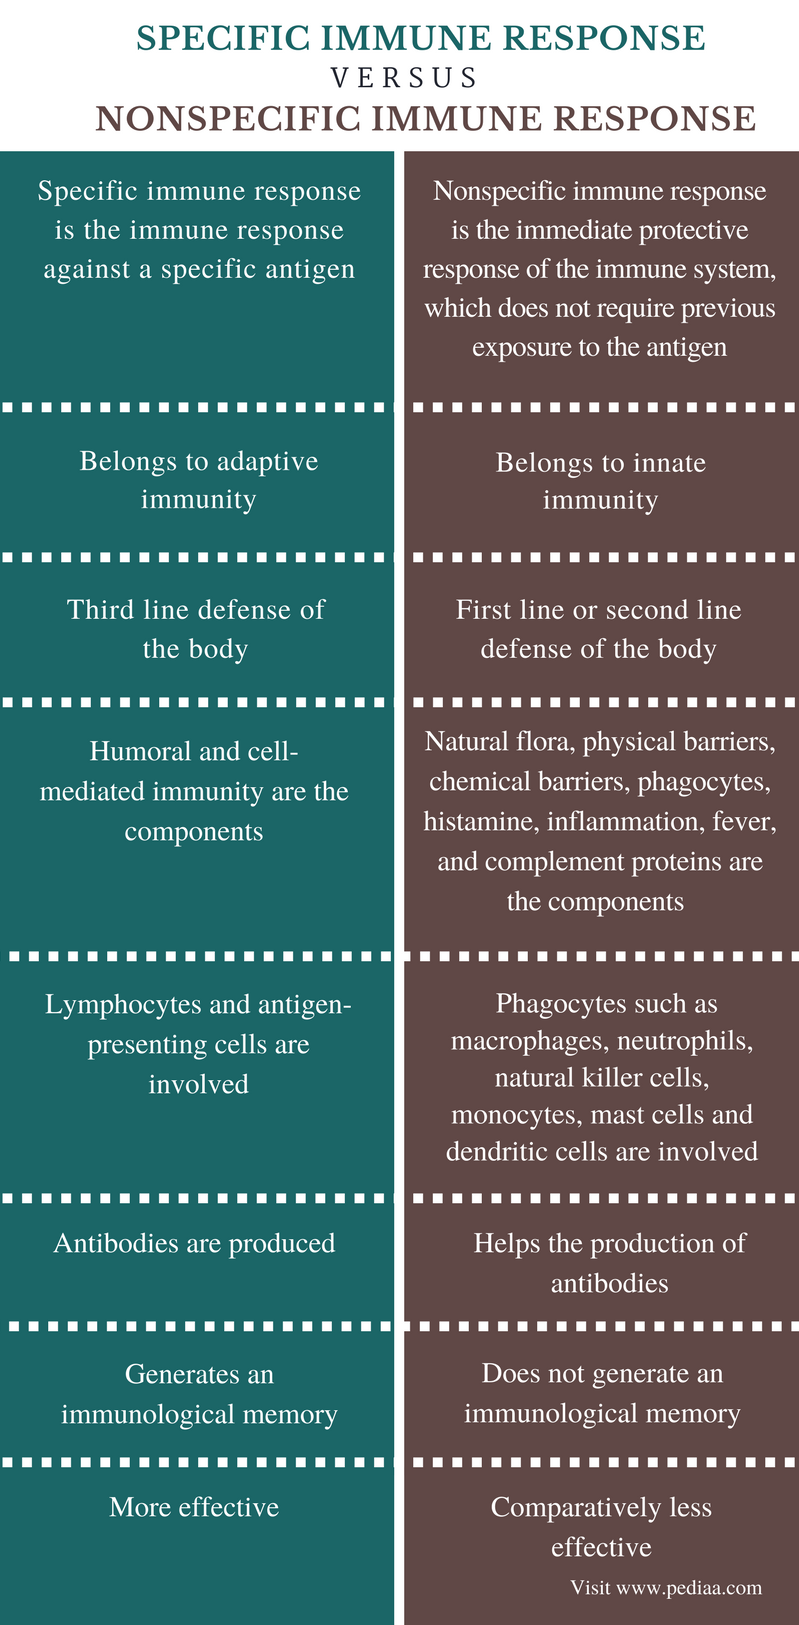 Difference Between Specific and Nonspecific Immune Response - Comparison Summary